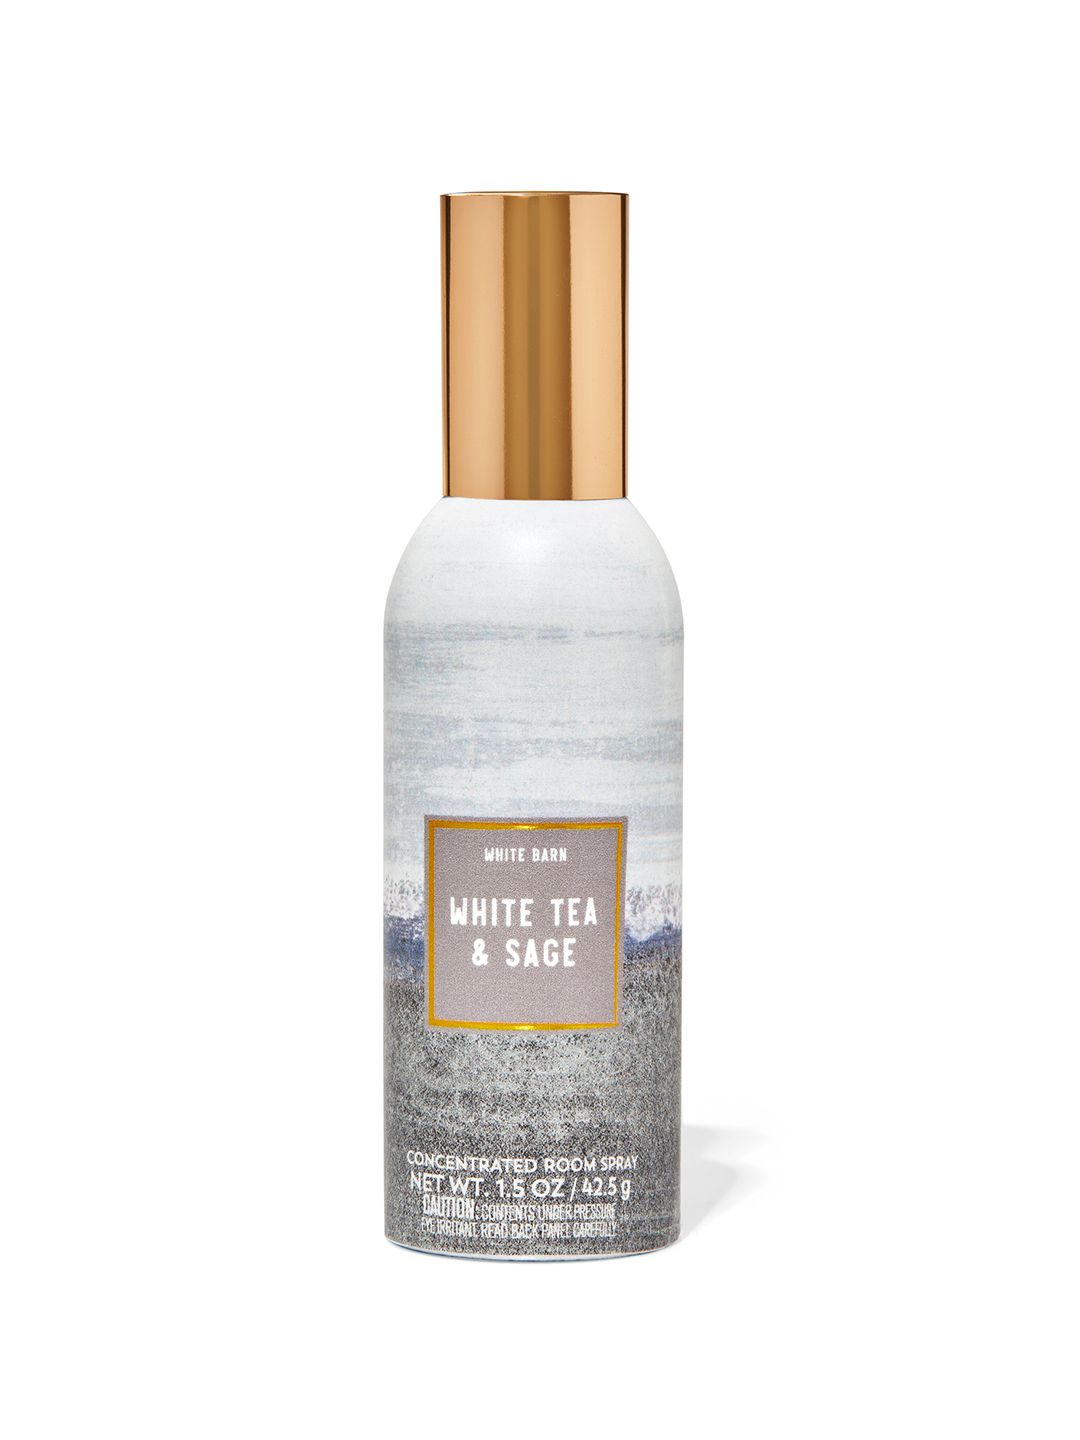 Bath & Body Works White Tea & Sage Concentrated Room Spray - 42.5 g Price in India